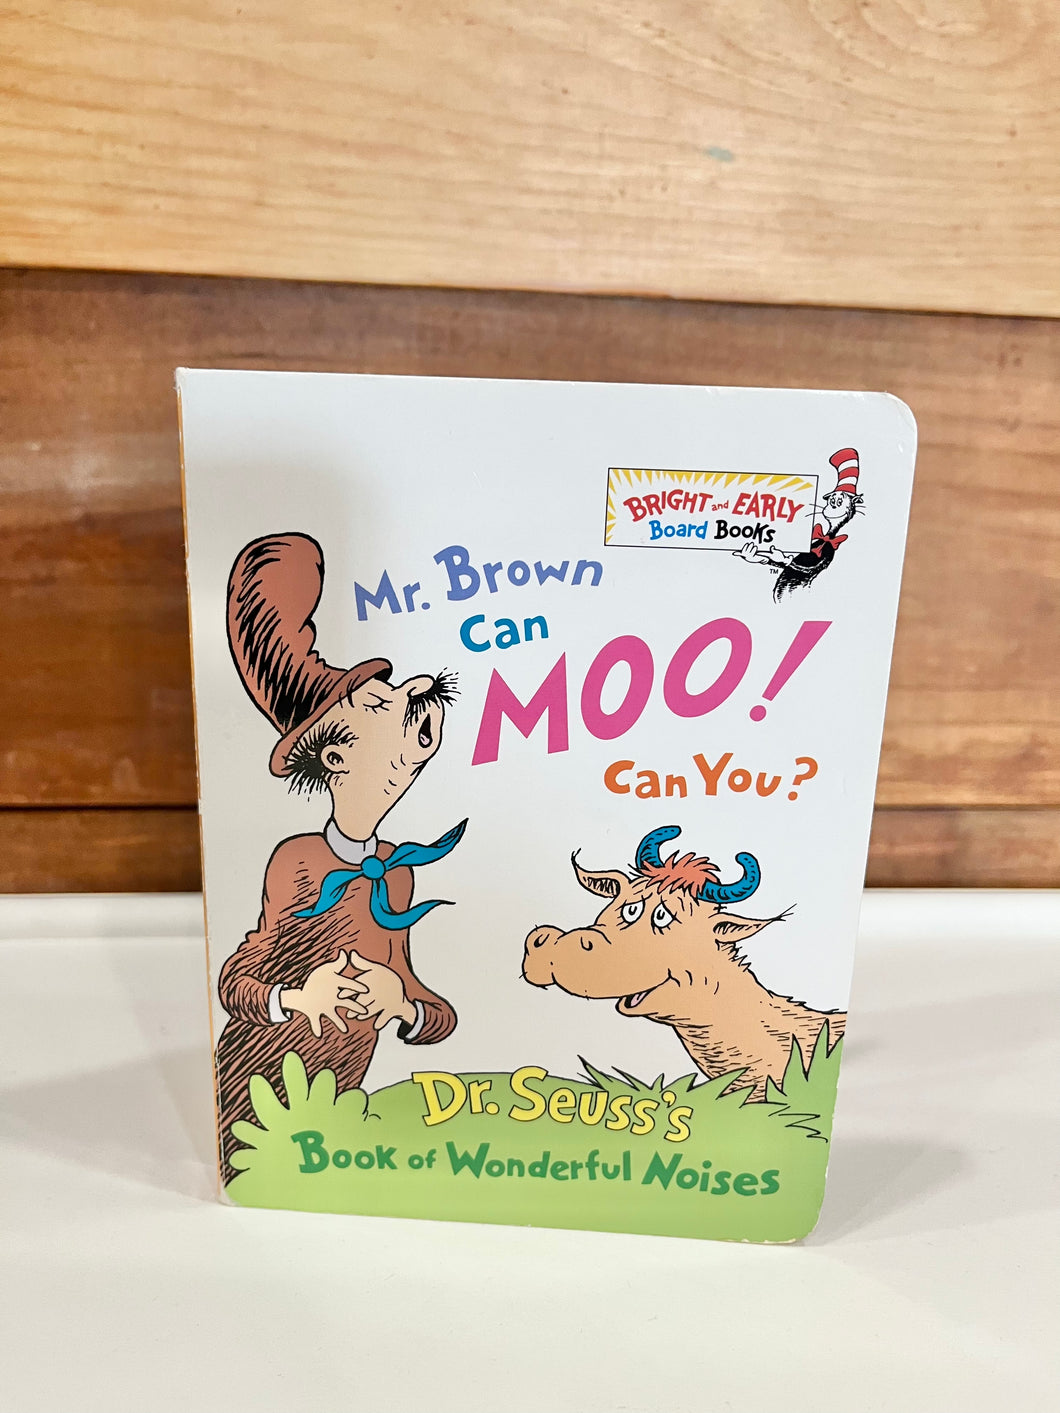 Dr. Seuss's Mr. Brown Can Moo Can You? Book